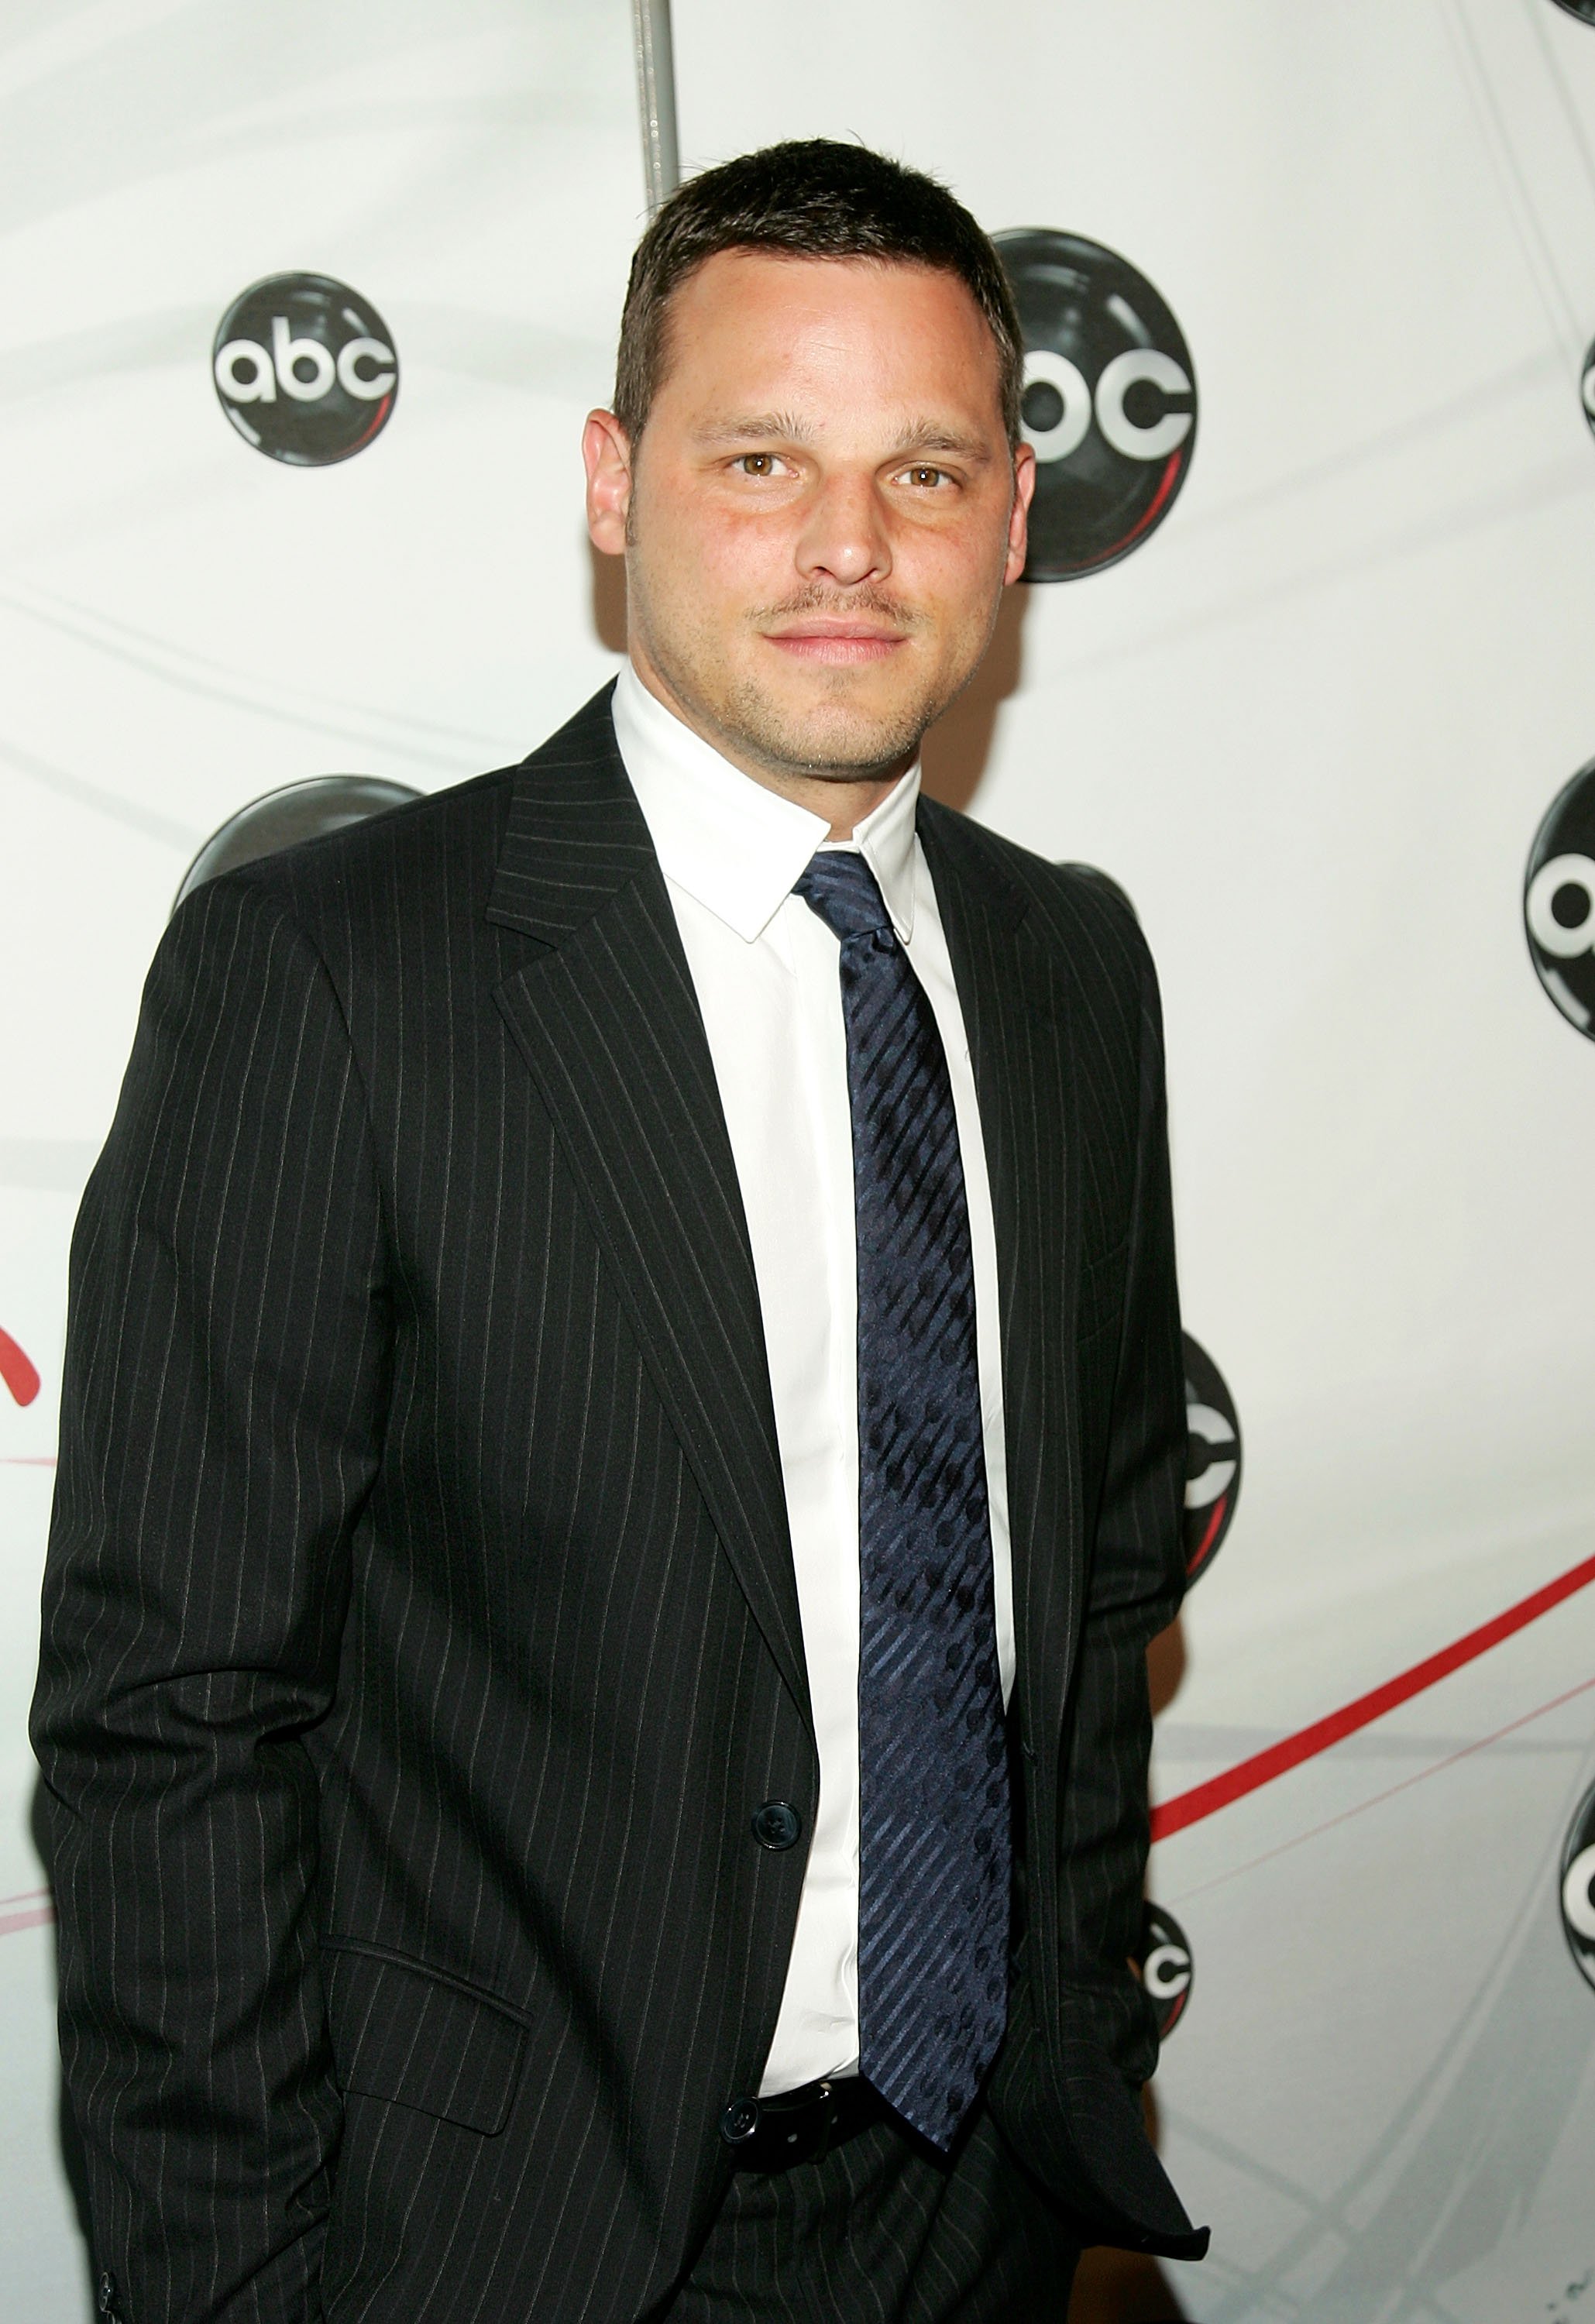 Justin Chambers attends the ABC Upfront presentation at Lincoln Center on May 15, 2007, in New York City. | Source: Getty Images.